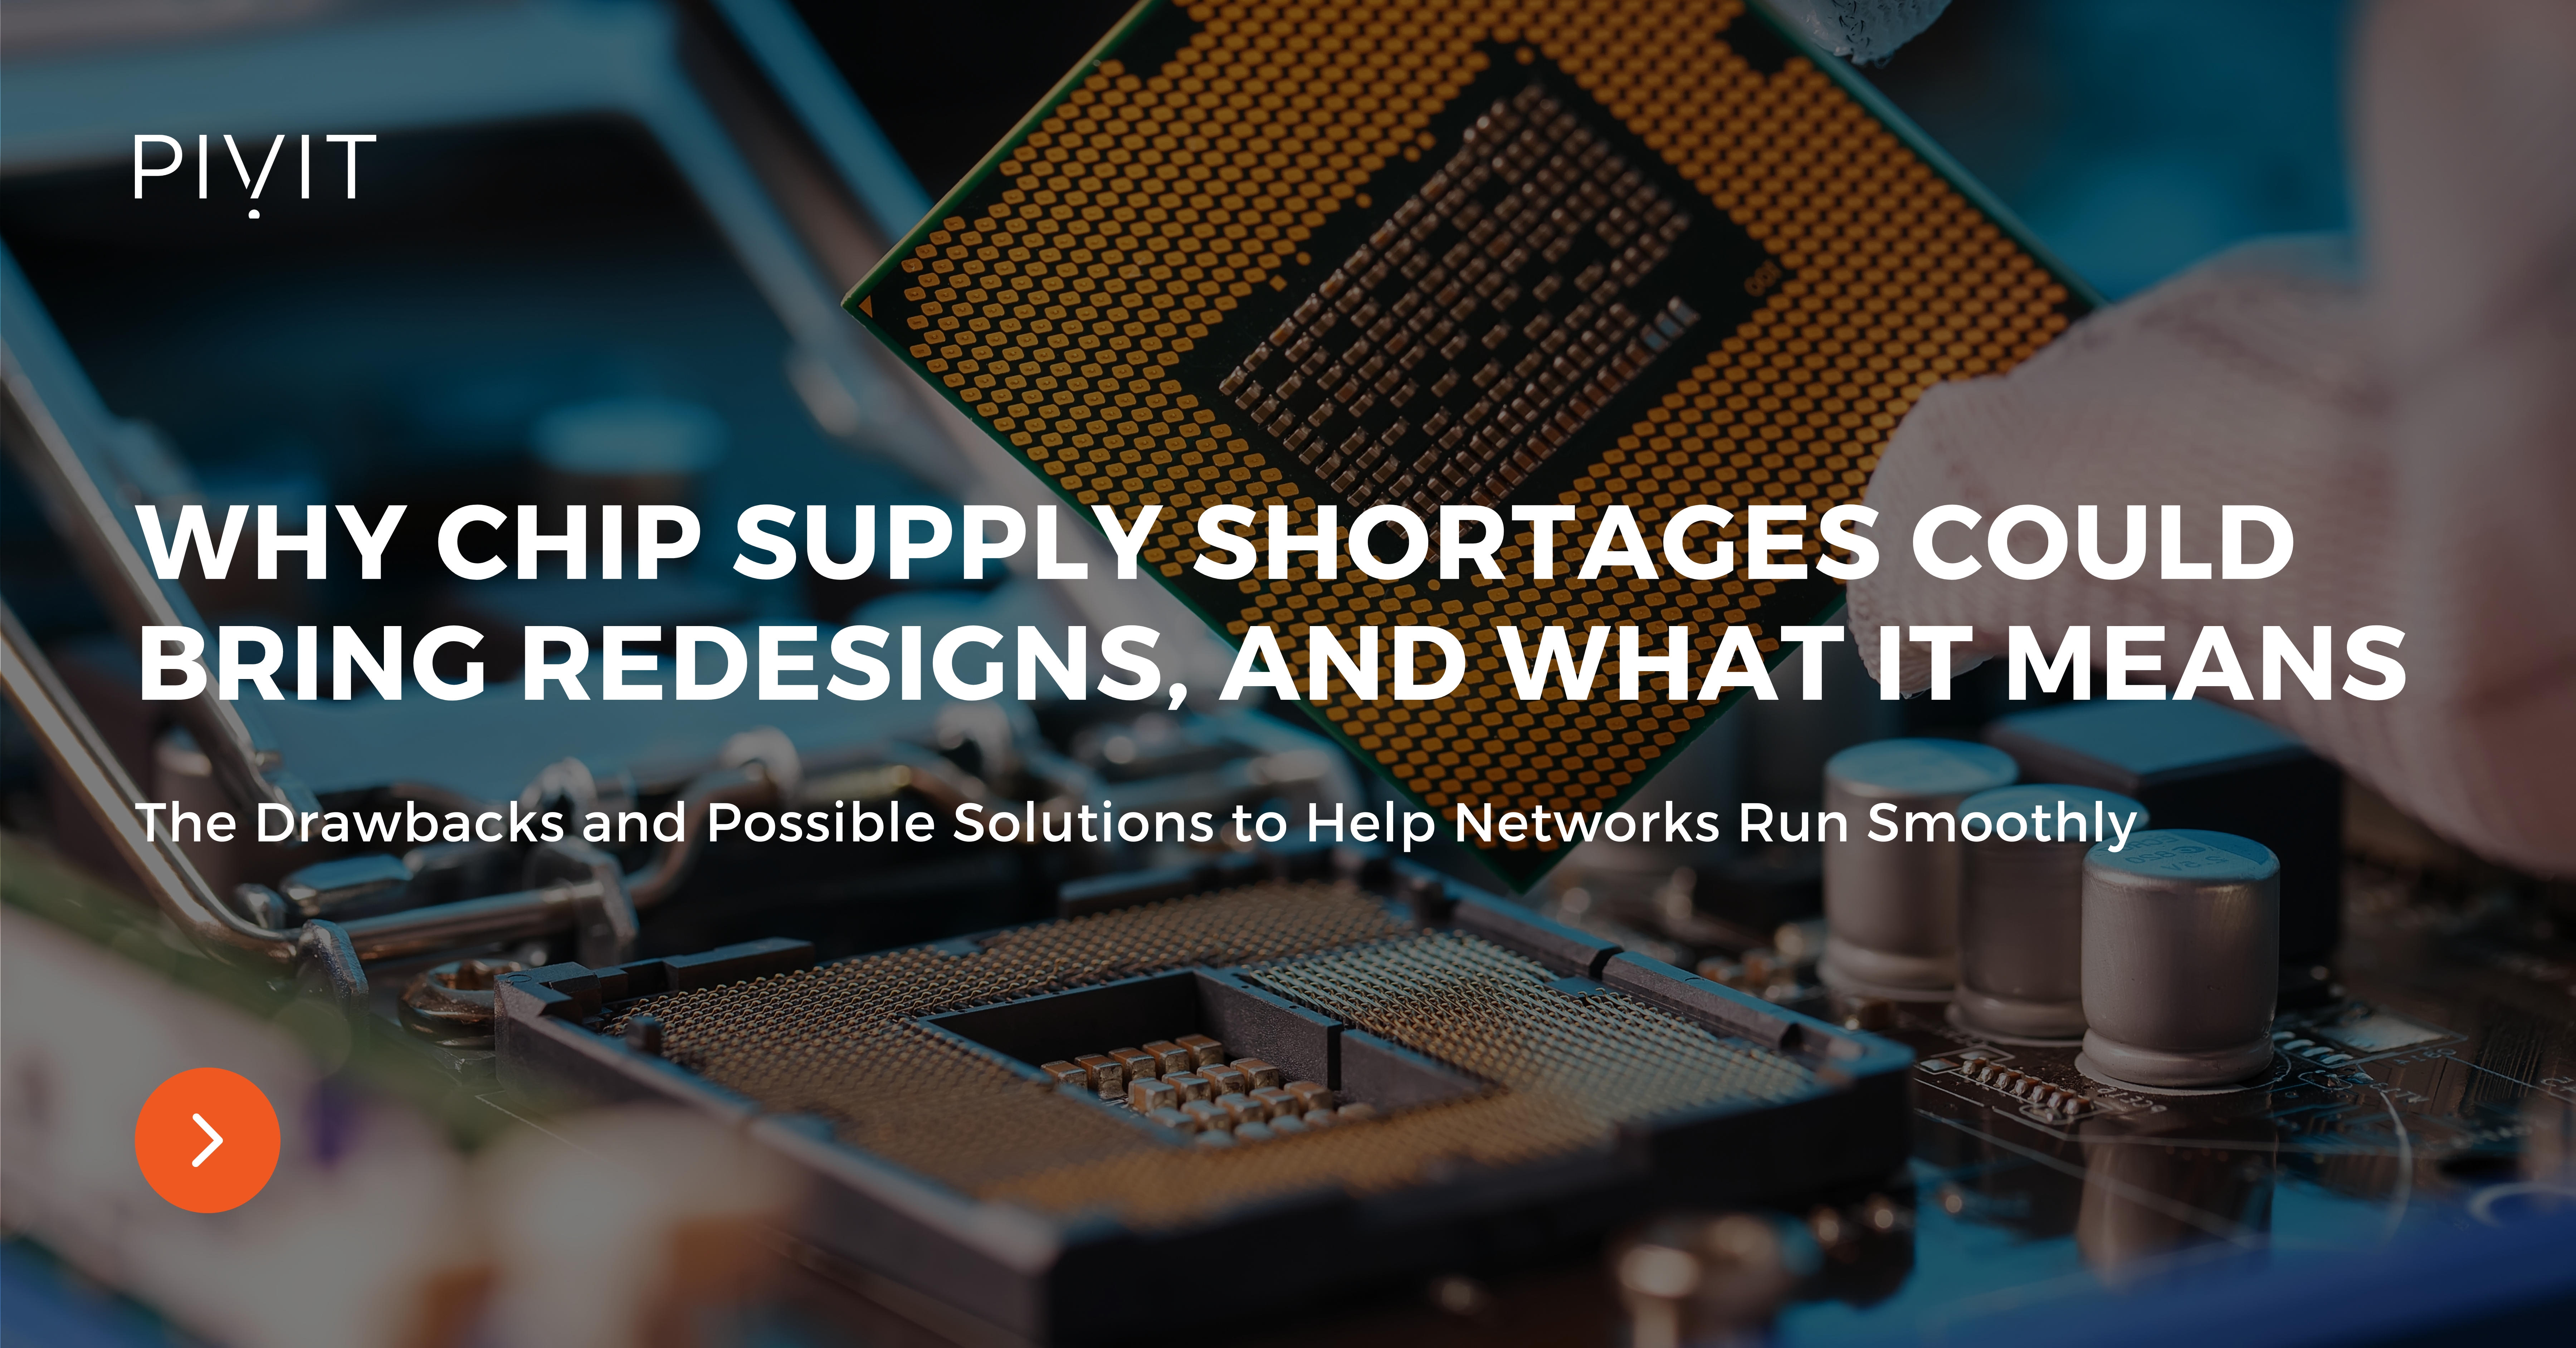 Why Chip Supply Shortages Could Bring Redesigns, and What It Means